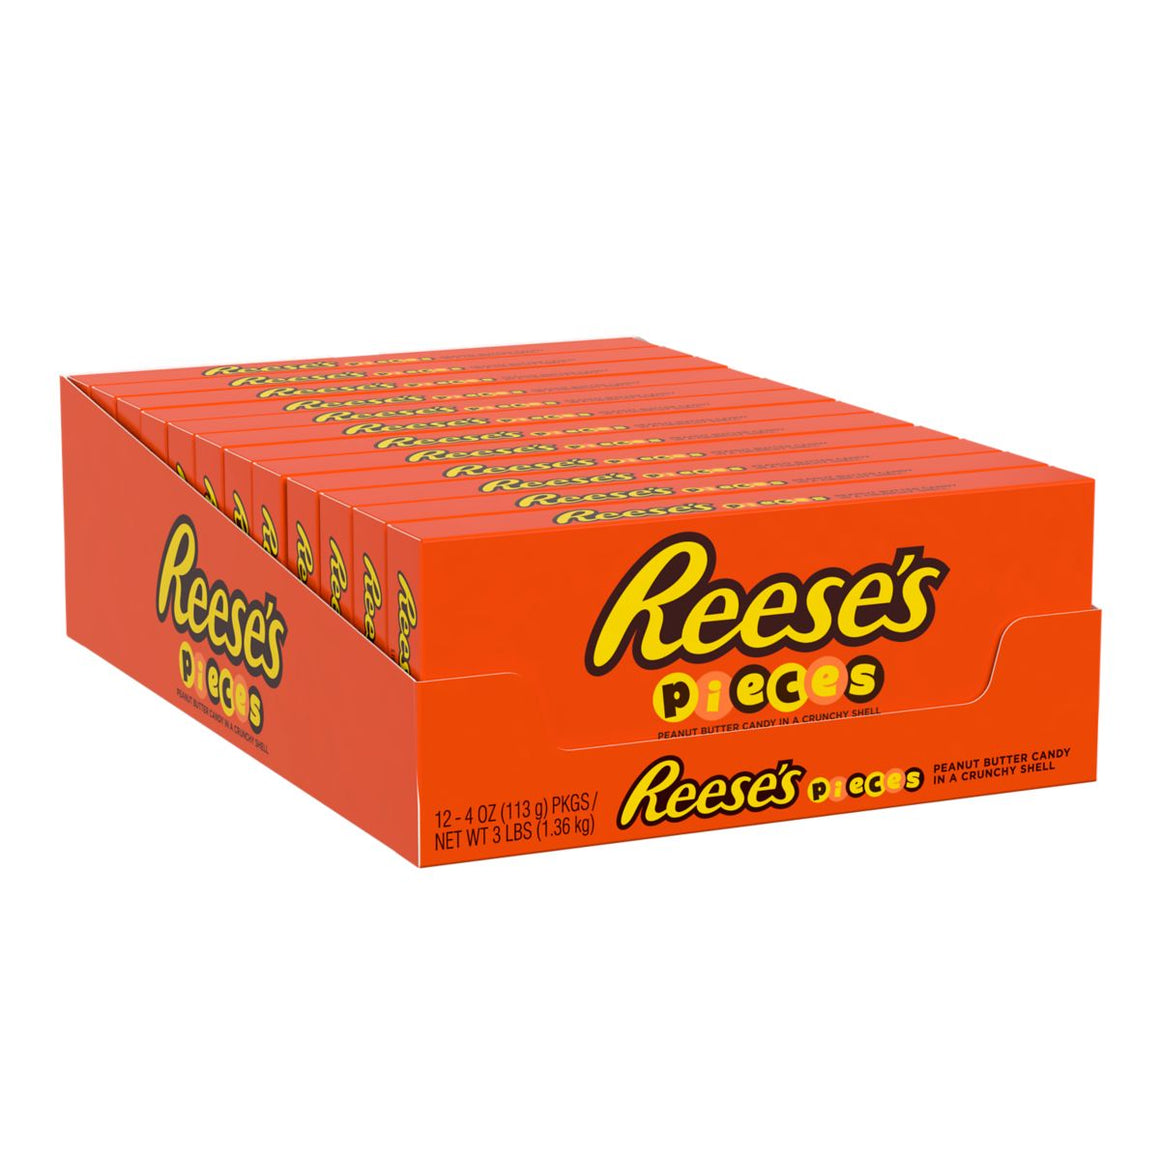 All City Candy Reese's Pieces Candy - 4-oz. Theater Box Theater Boxes Hershey's For fresh candy and great service, visit www.allcitycandy.com